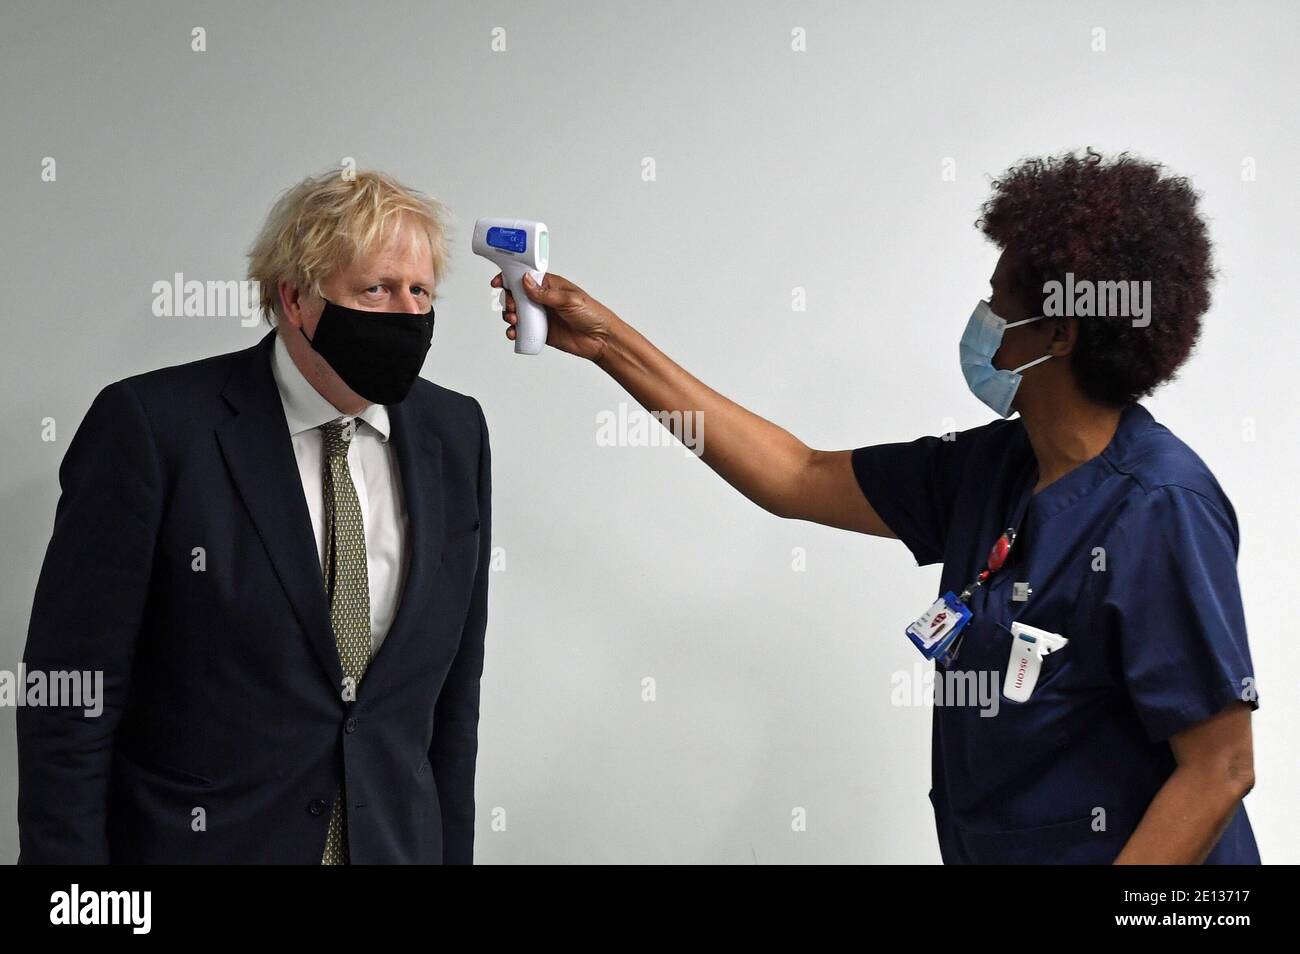 Prime Minister Boris Johnson has his temperature checked during a visit to Chase Farm Hospital in north London, on the day that the NHS ramps up its vaccination programme with 530,000 doses of the newly approved Oxford/AstraZeneca Covid-19 vaccine jab available for rollout across the UK. Stock Photo